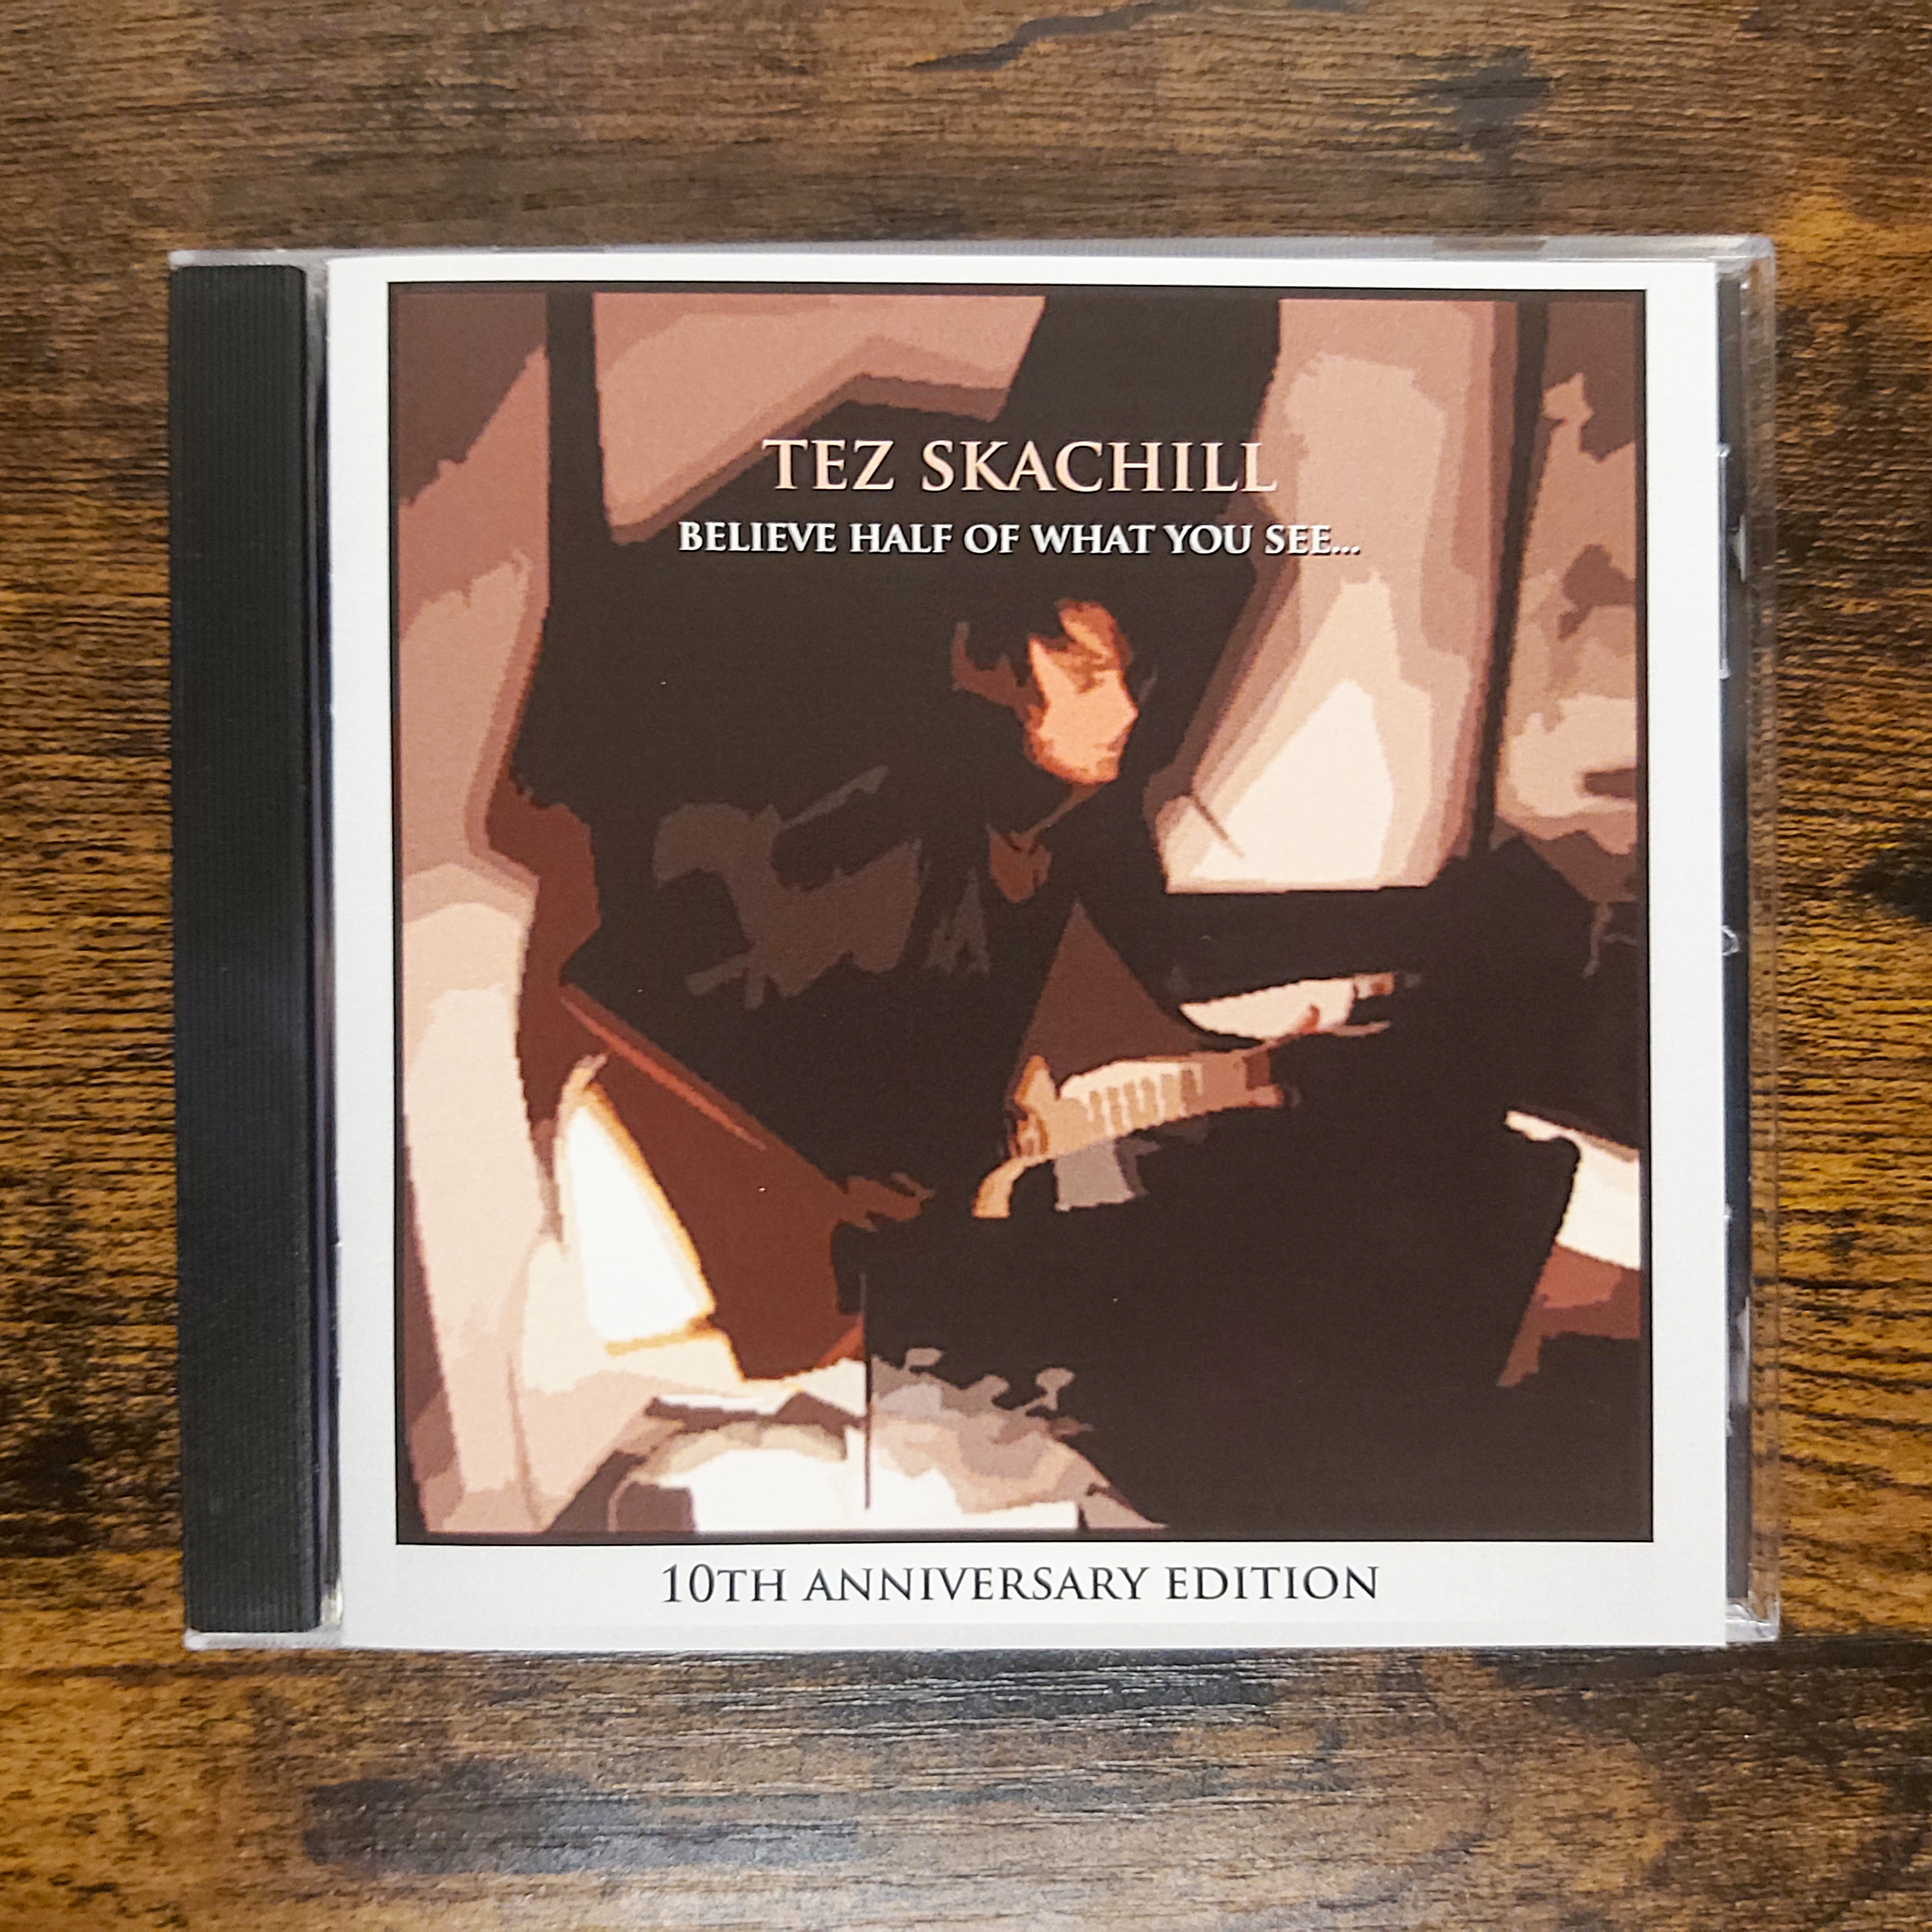 Tez Skachill - Believe Half Of What You See... 10th Anniversary Album Edition CD